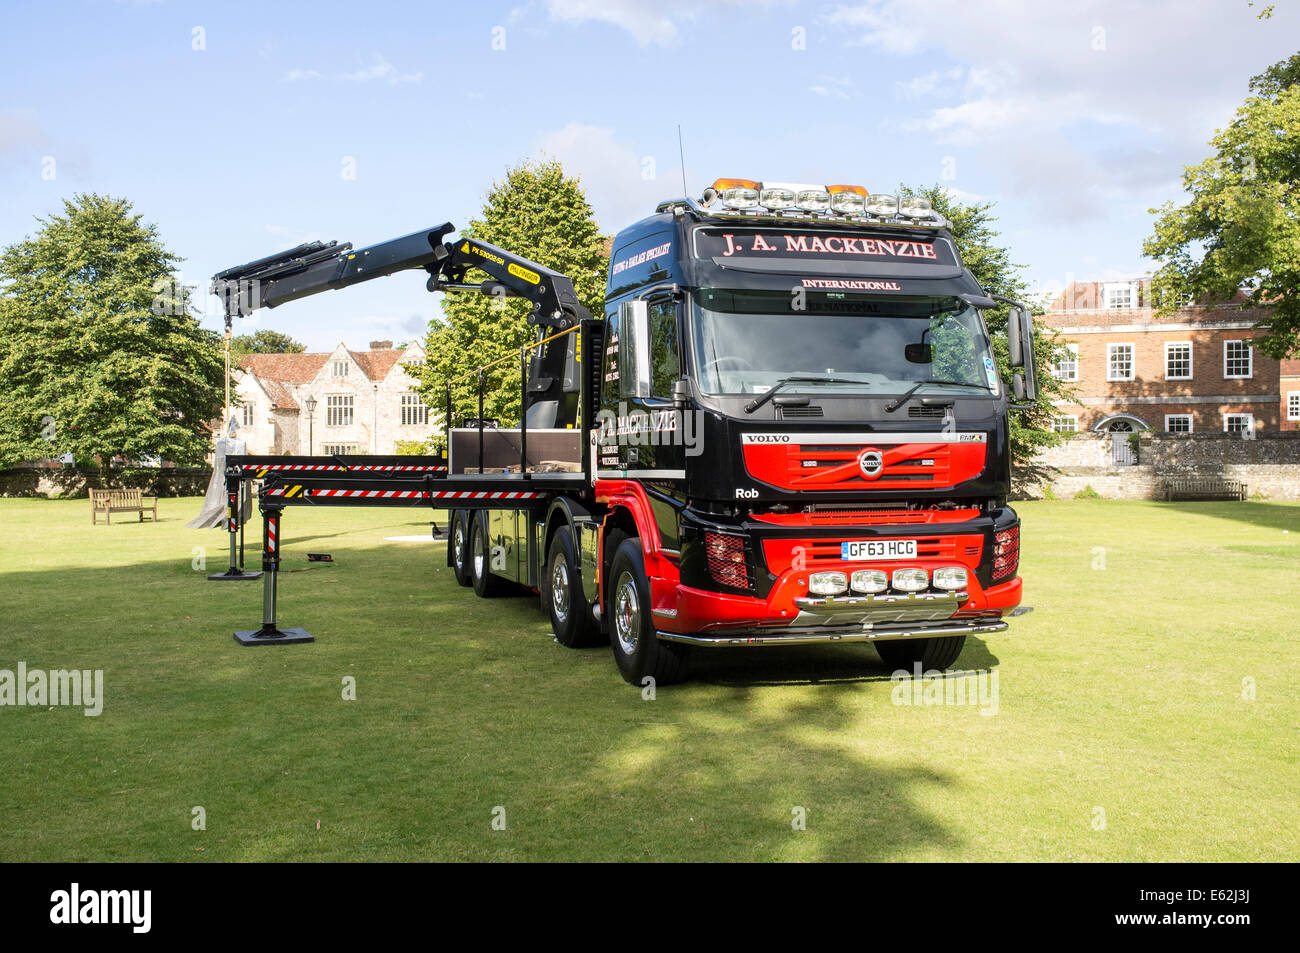 Volvo truck with Palfinger crane with stabilizers extended Stock Photo